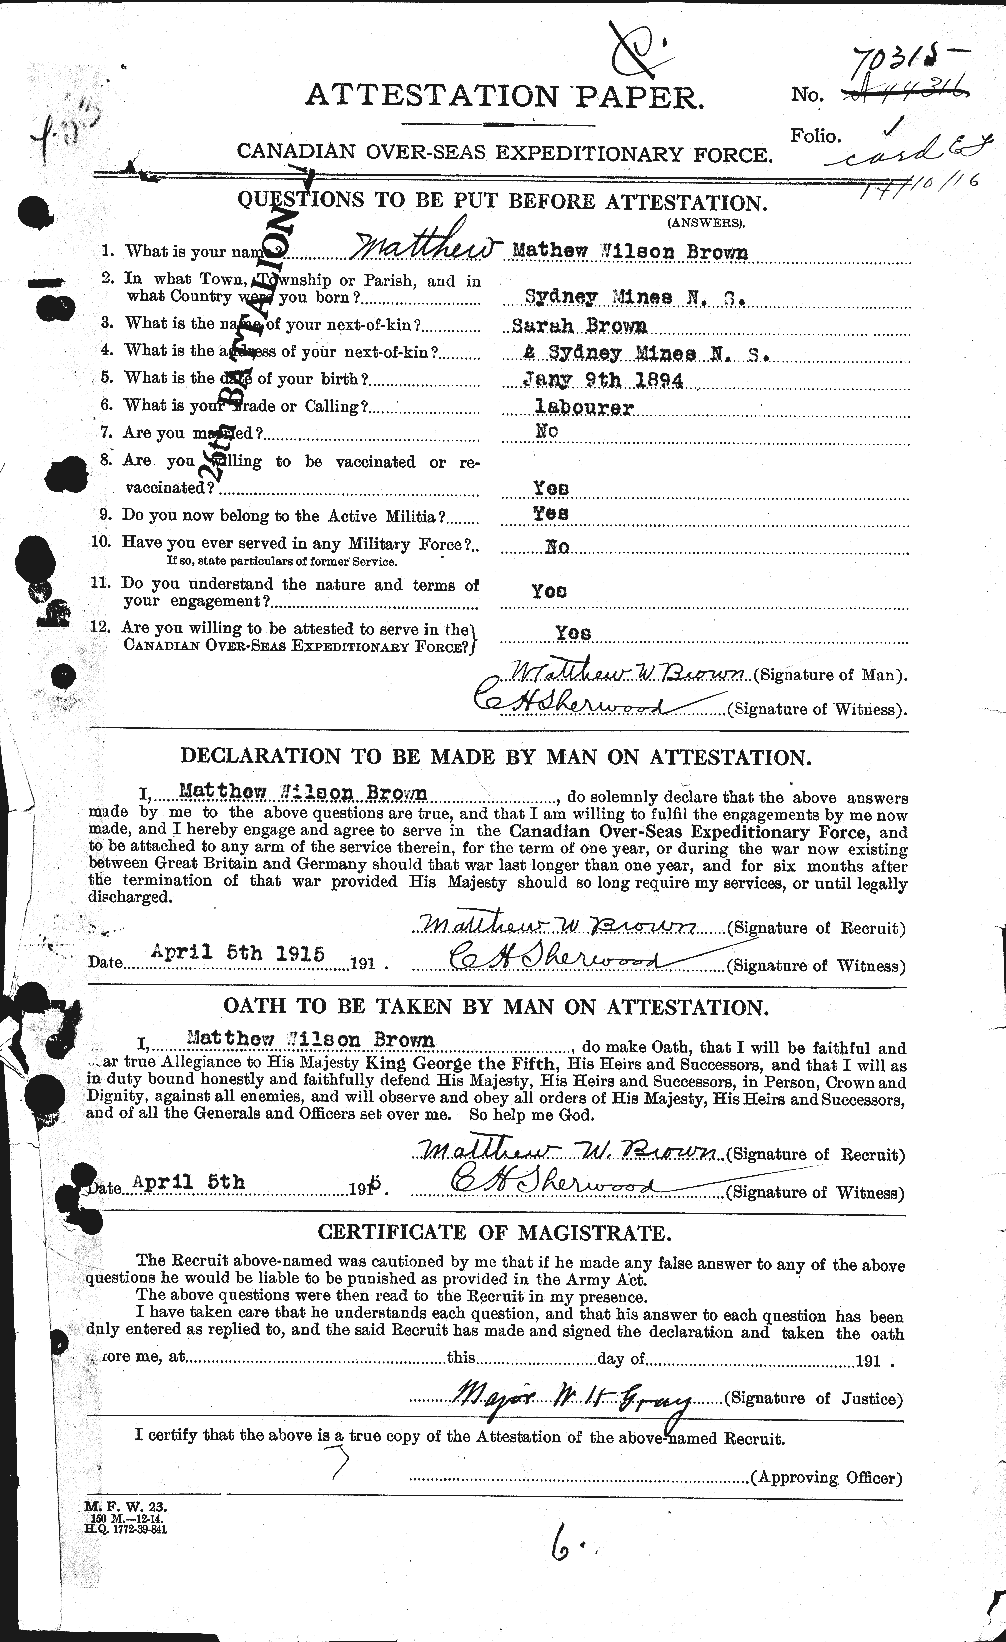 Personnel Records of the First World War - CEF 267040a